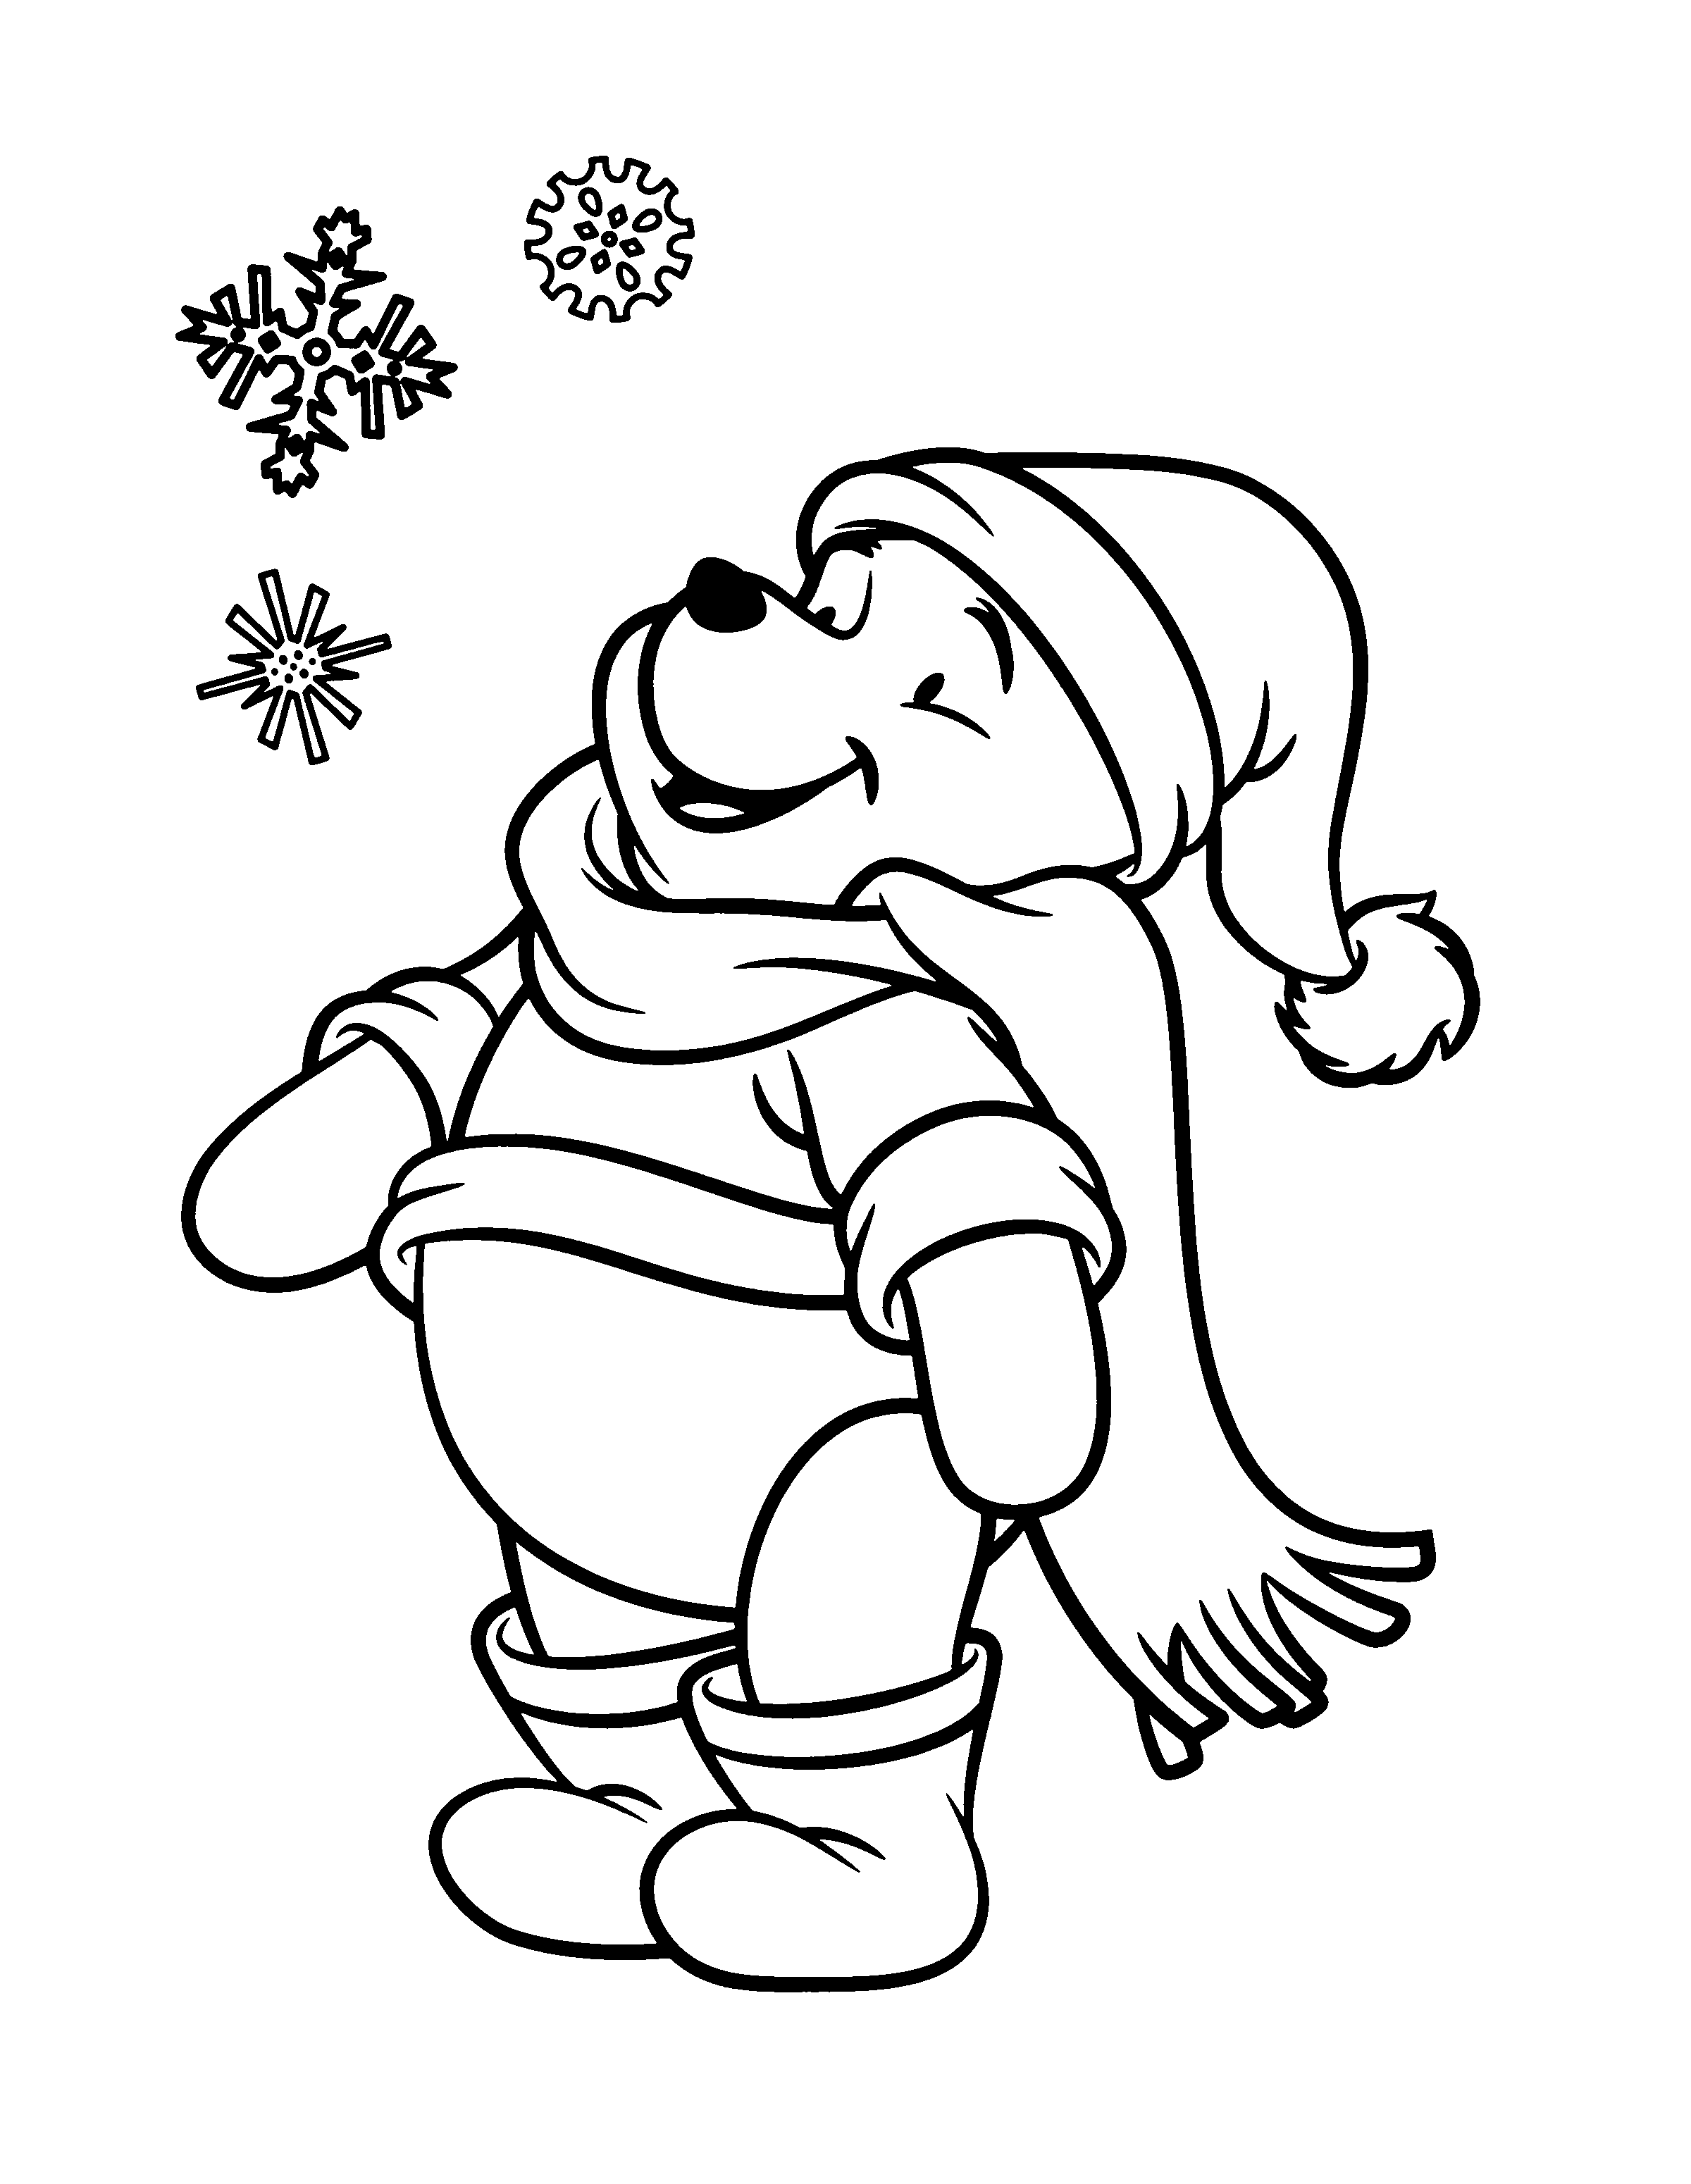 Winnie the pooh coloring pages - SheetalColor.com